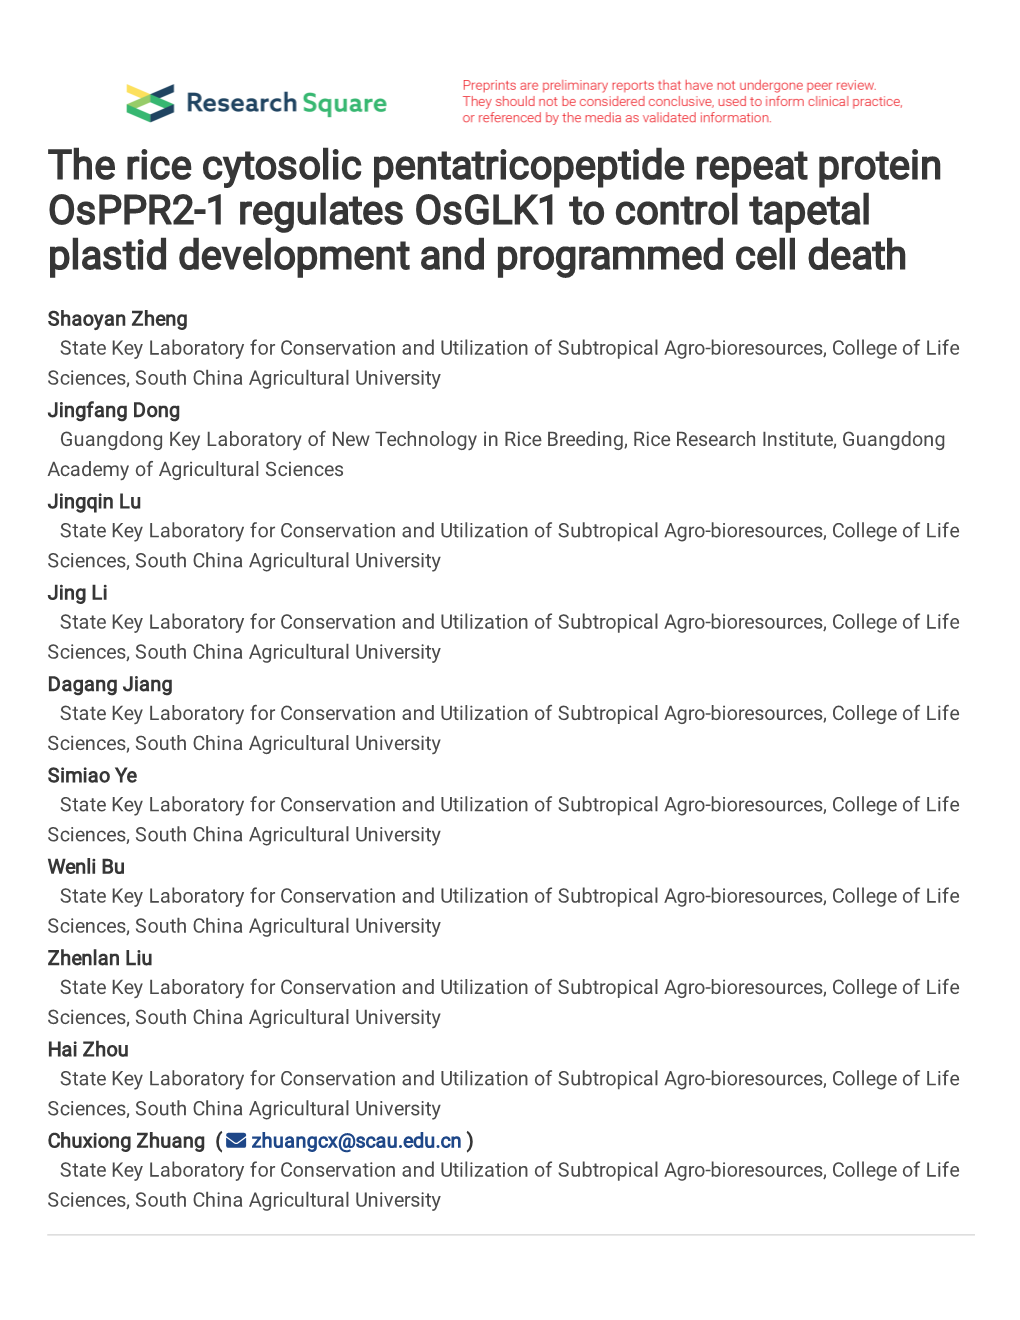 The Rice Cytosolic Pentatricopeptide Repeat Protein Osppr2-1 Regulates Osglk1 to Control Tapetal Plastid Development and Programmed Cell Death